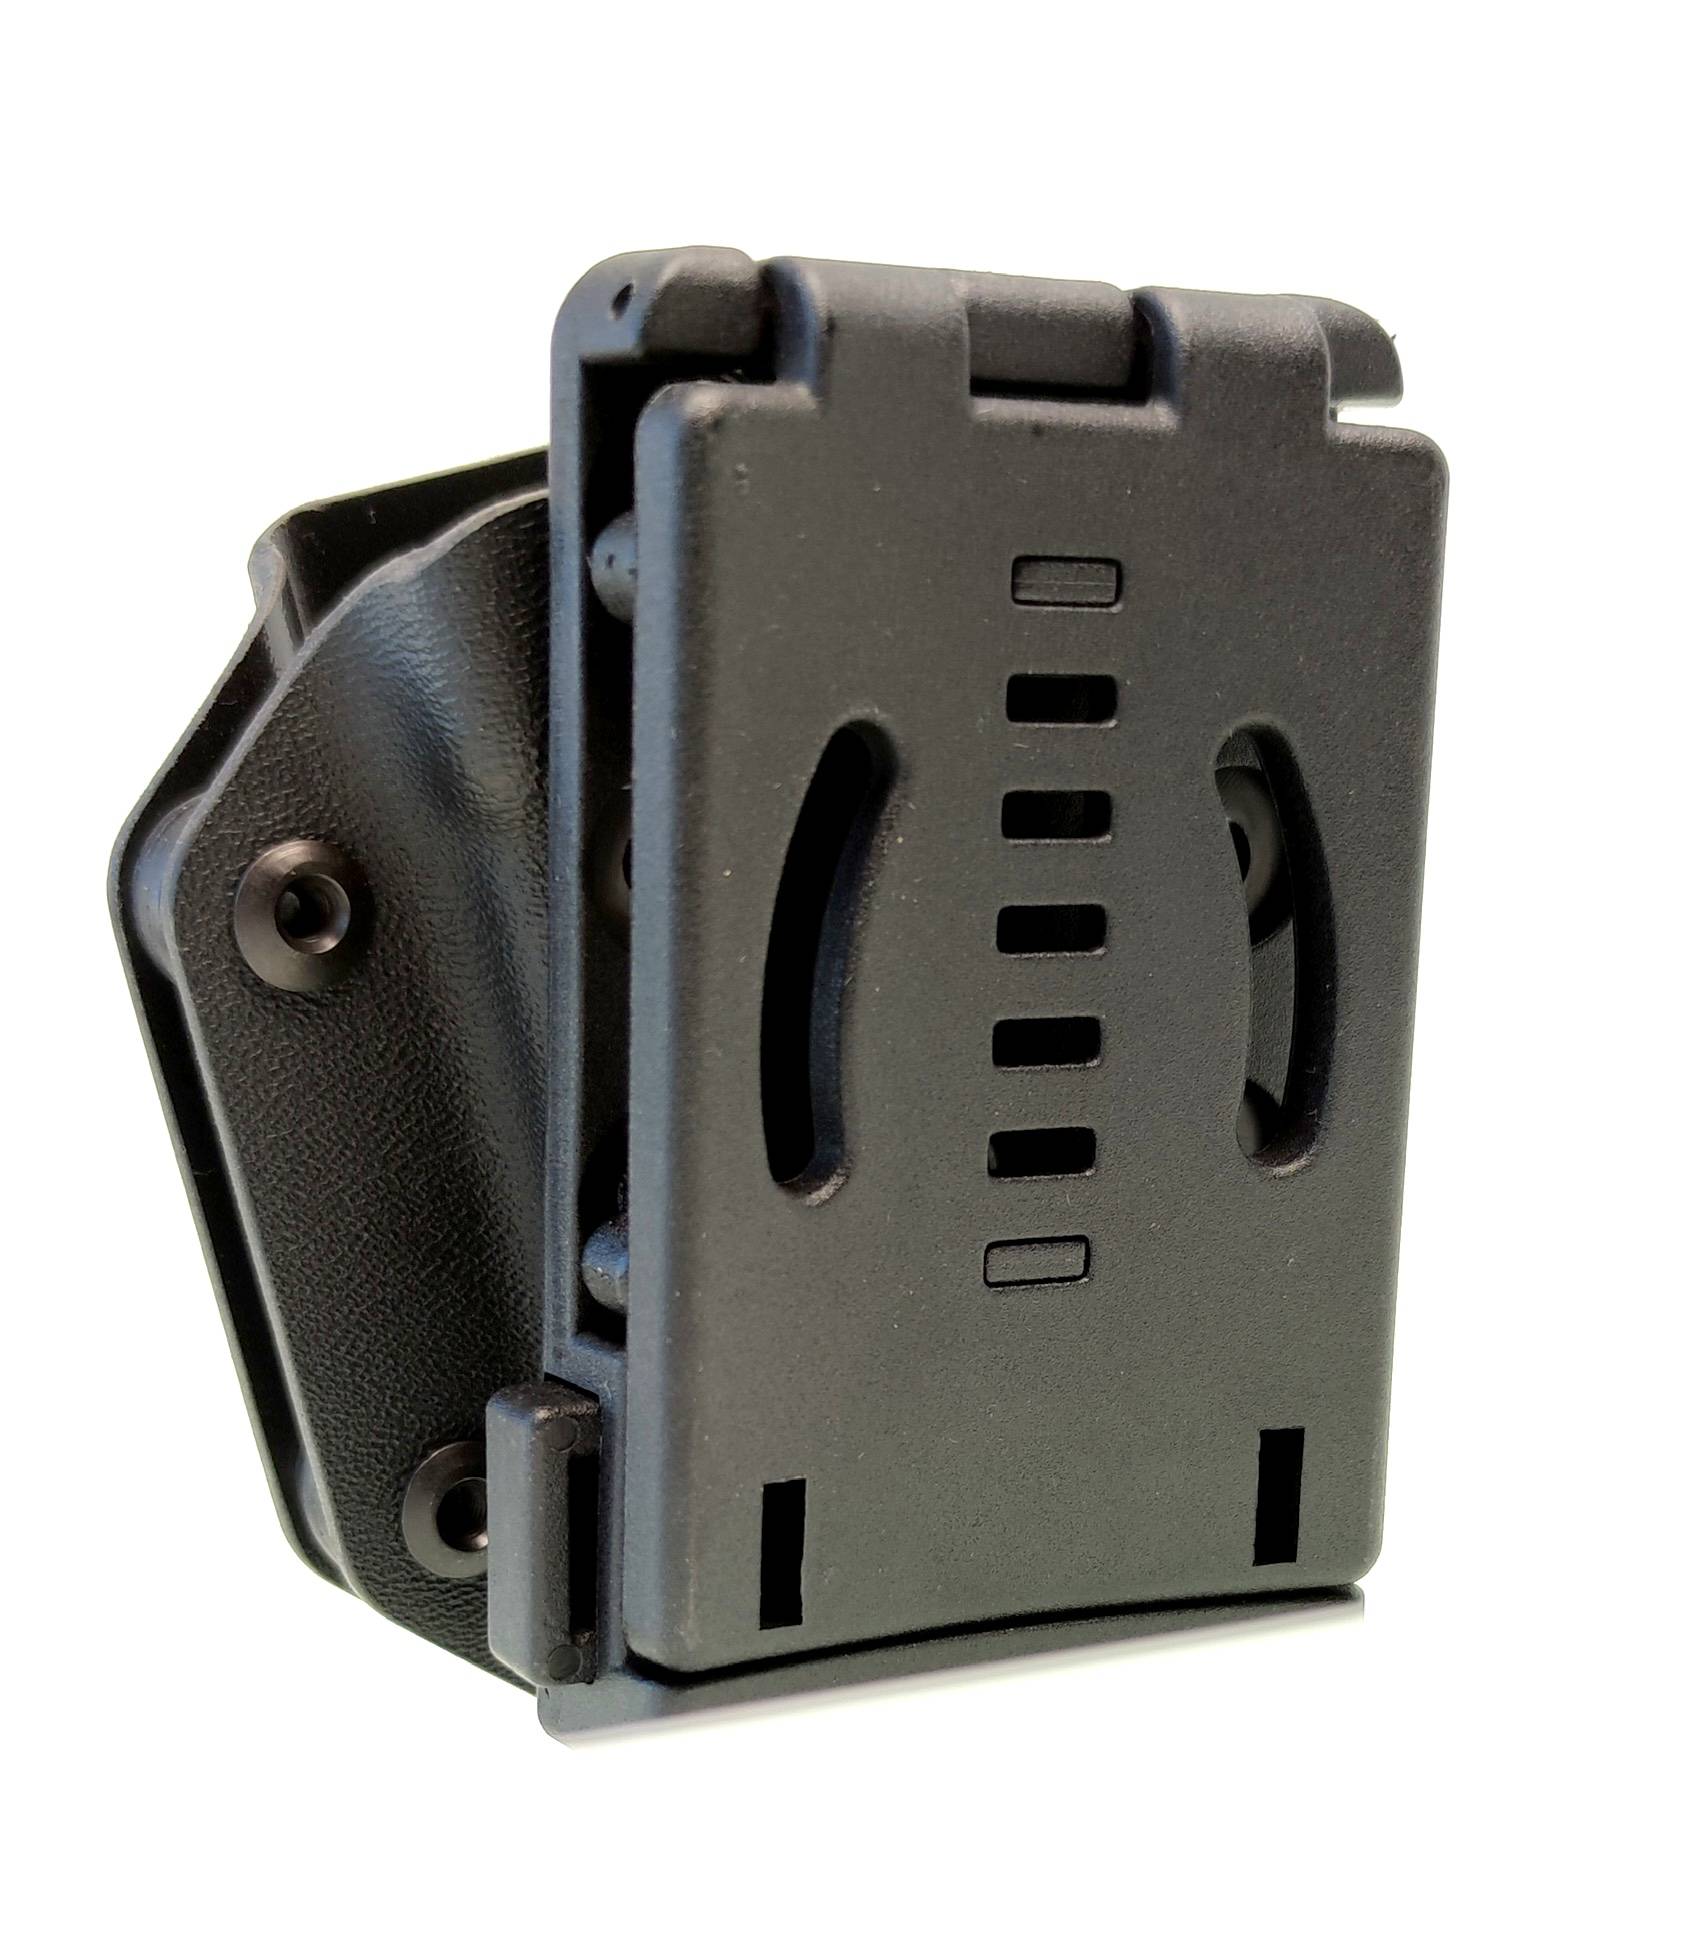 Magazine Pouch for Sig Sauer MPX Kydex by RC Tech